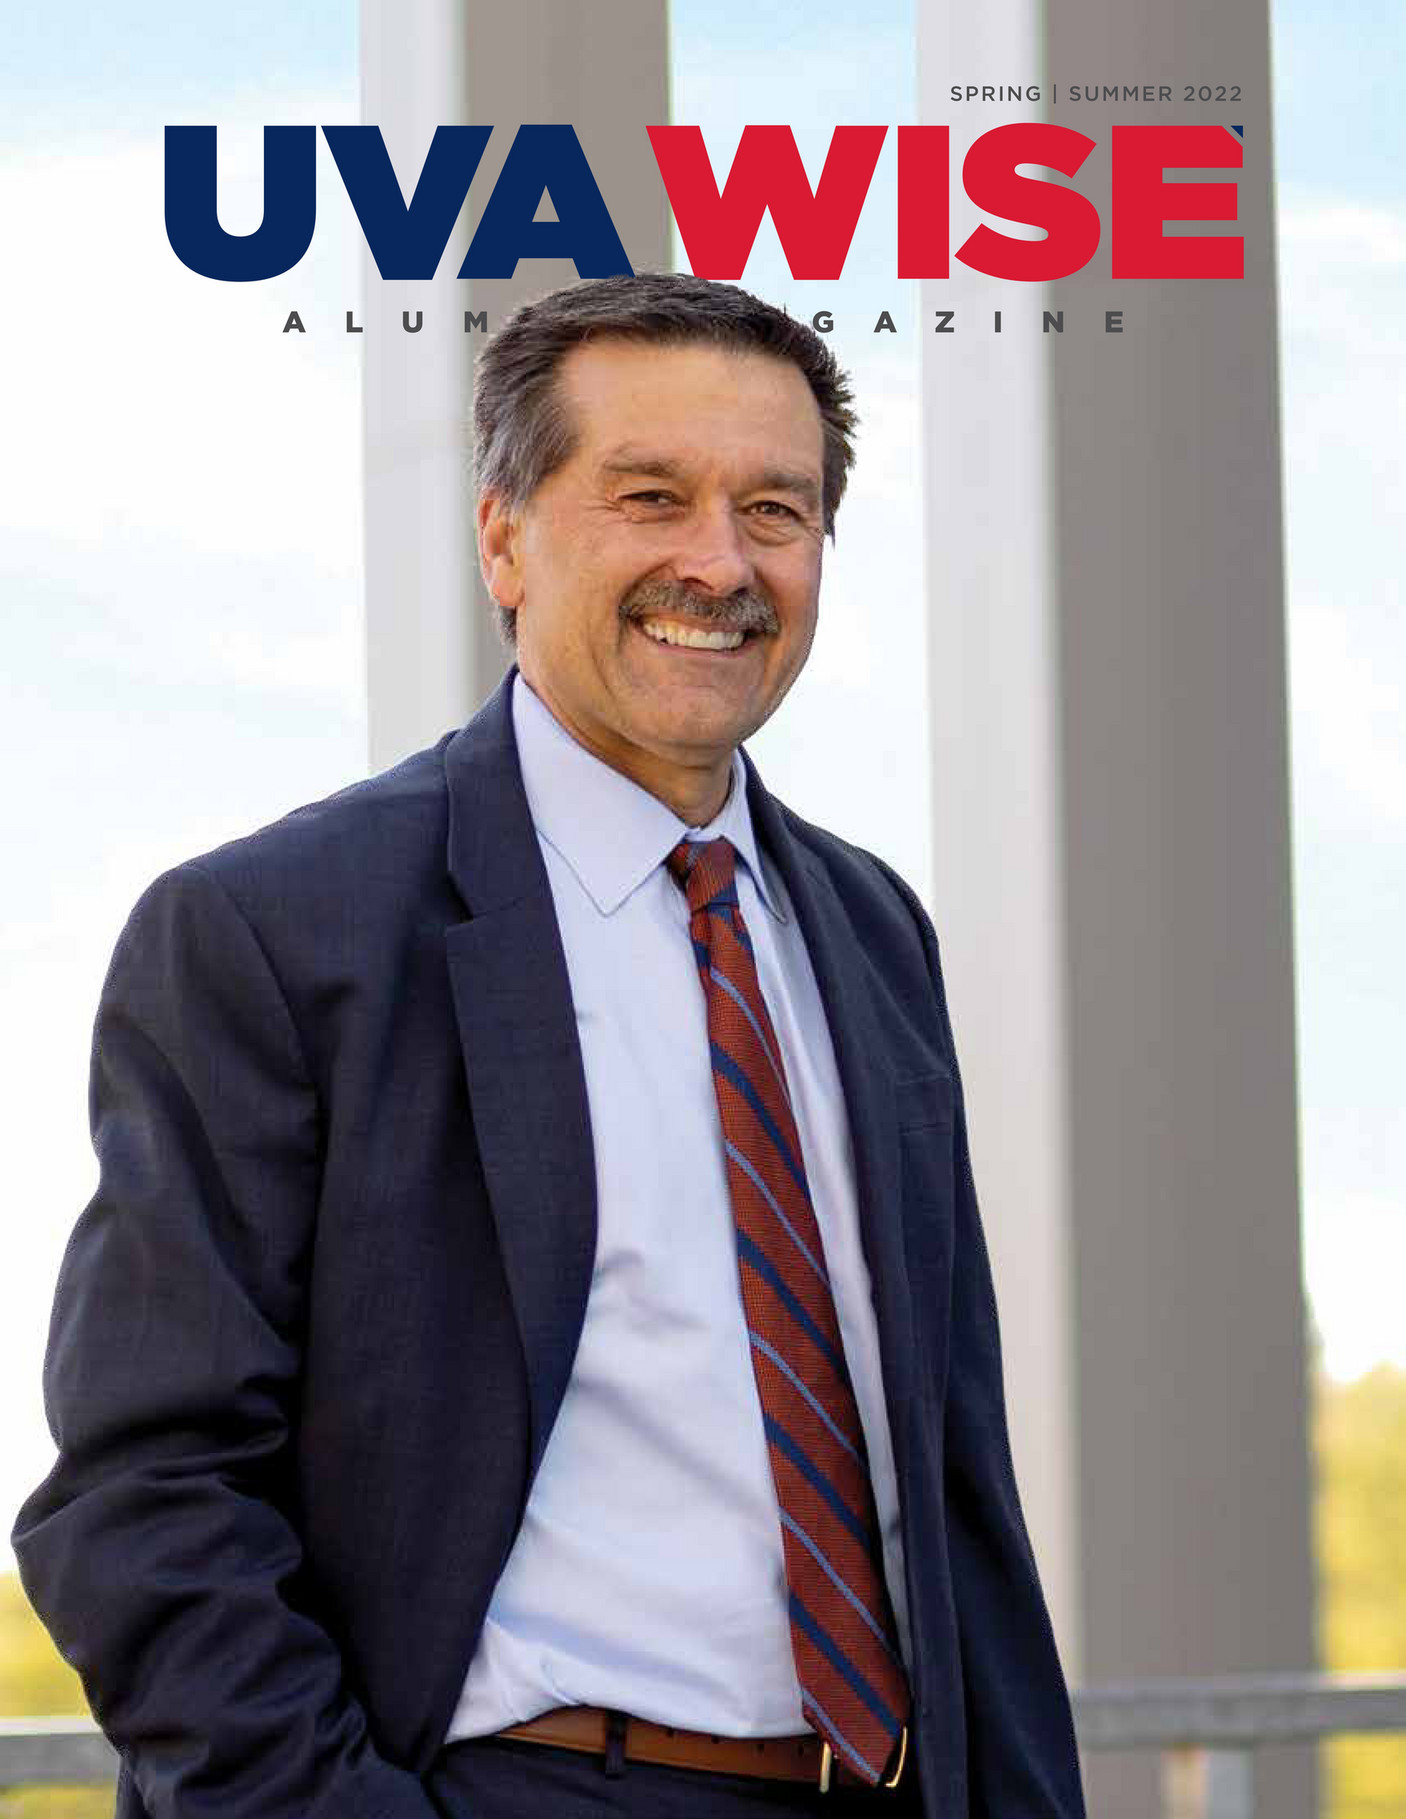 University Of Virginia S College At Wise Uva Wise Magazine Spring Summer 22 Page 2 3